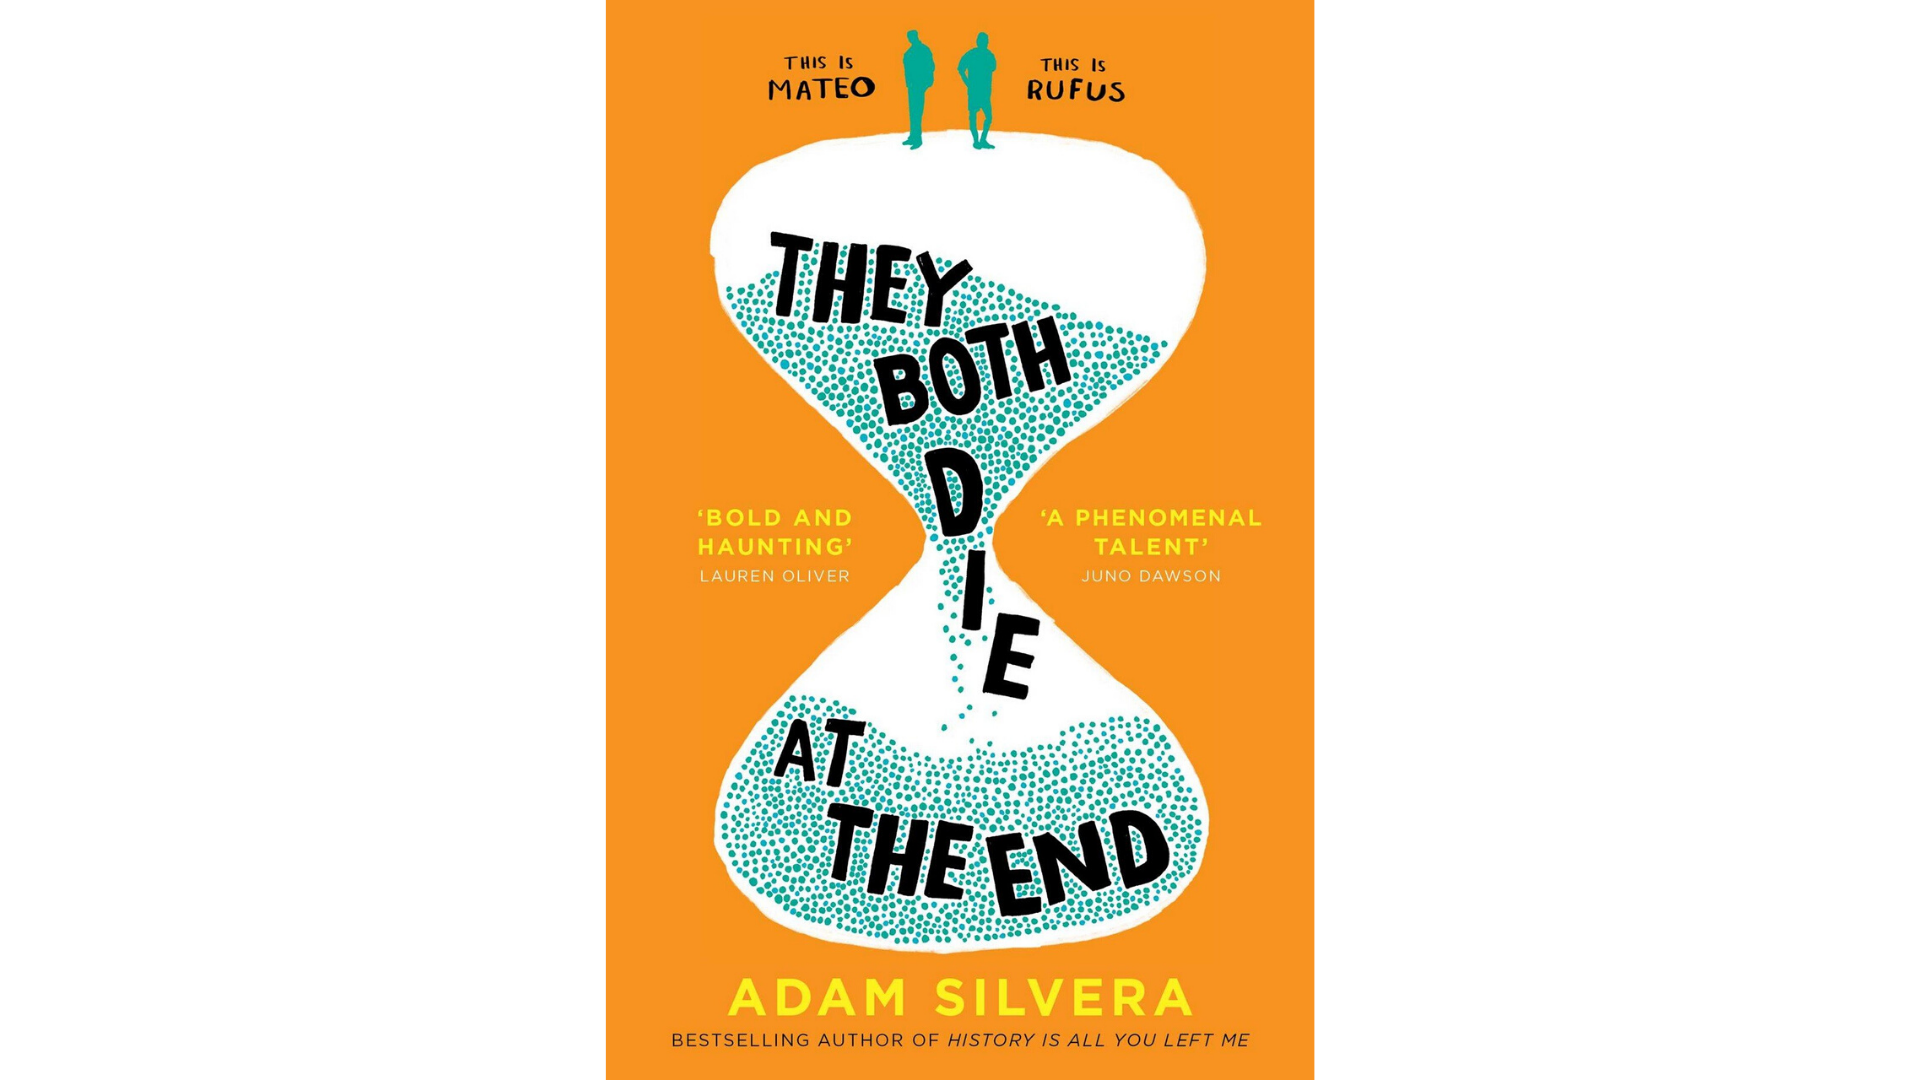 They this book this year. They both die at the end книга. «They both die at the end» by Adam Silvera. Маттео Торрес и Руфус Эметерио.